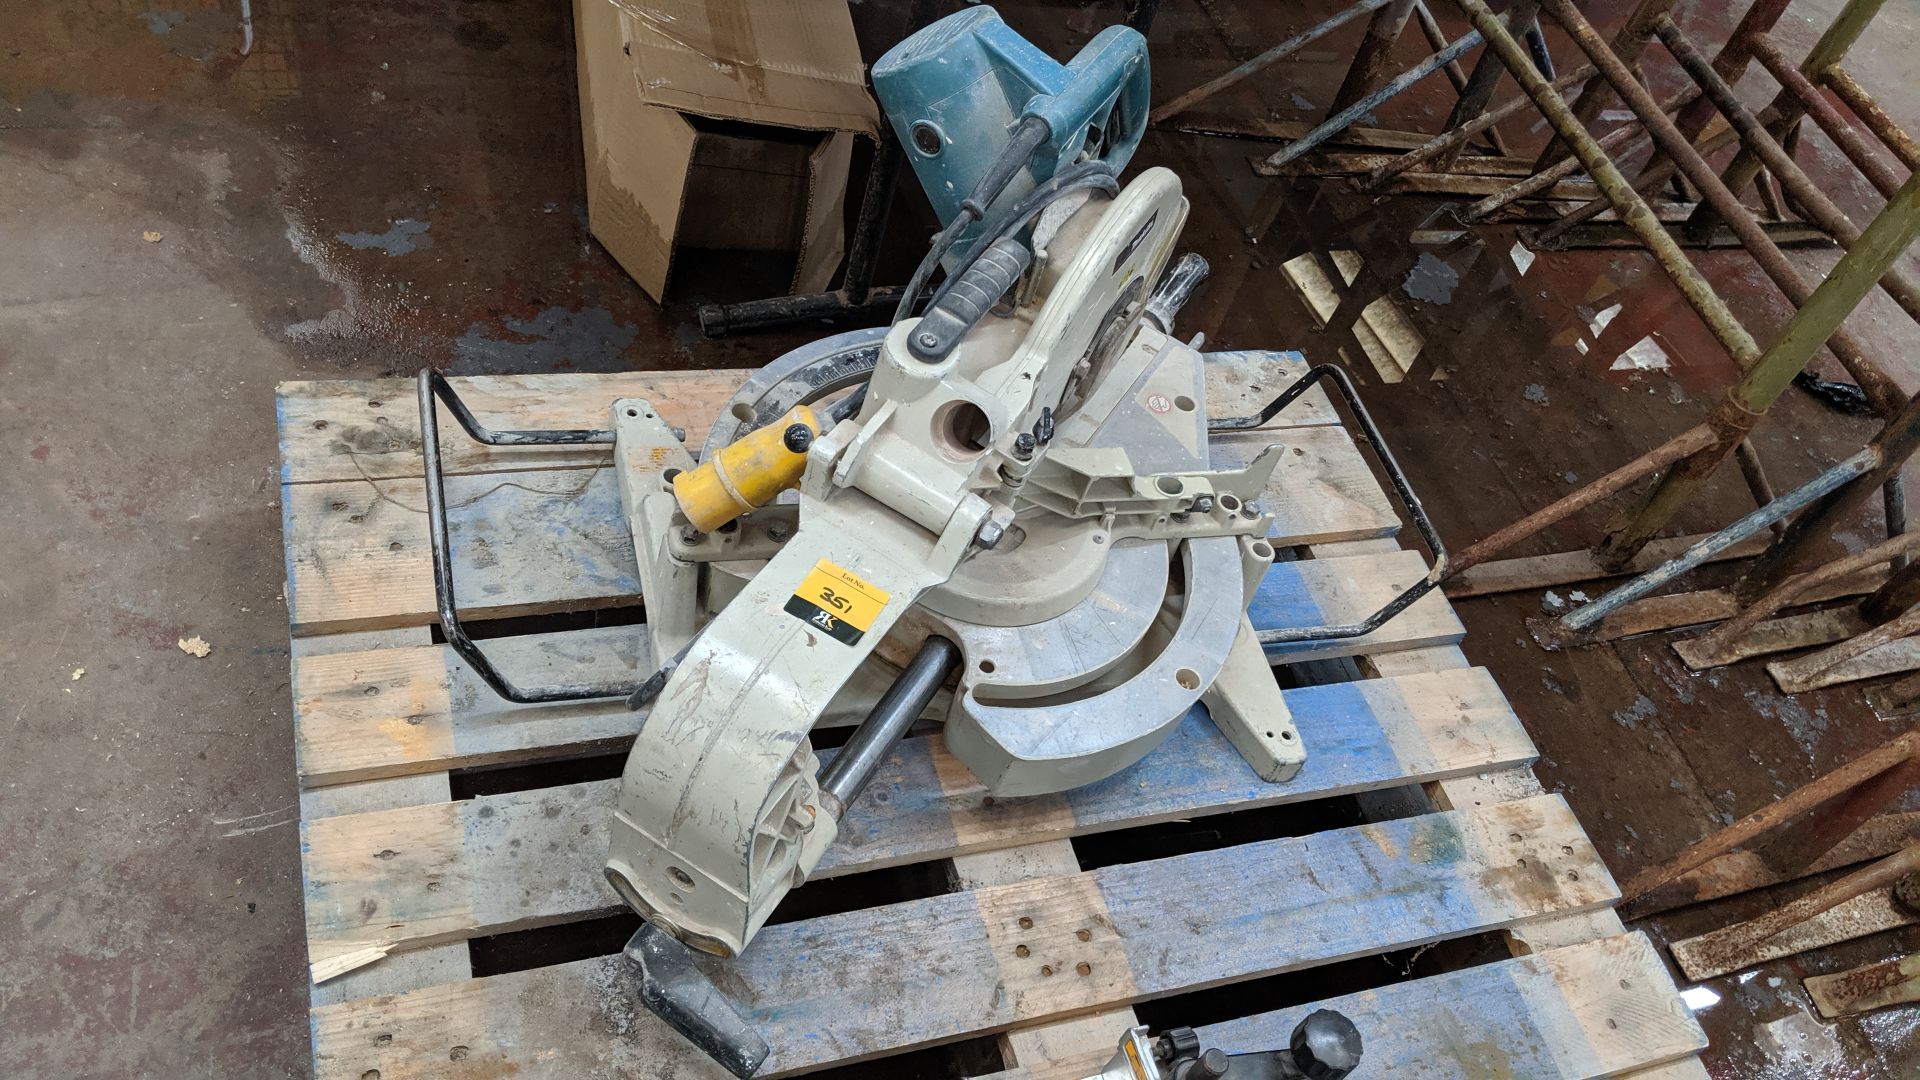 Makita 110V mitre saw model LS1013 IMPORTANT: Please remember goods successfully bid upon must be